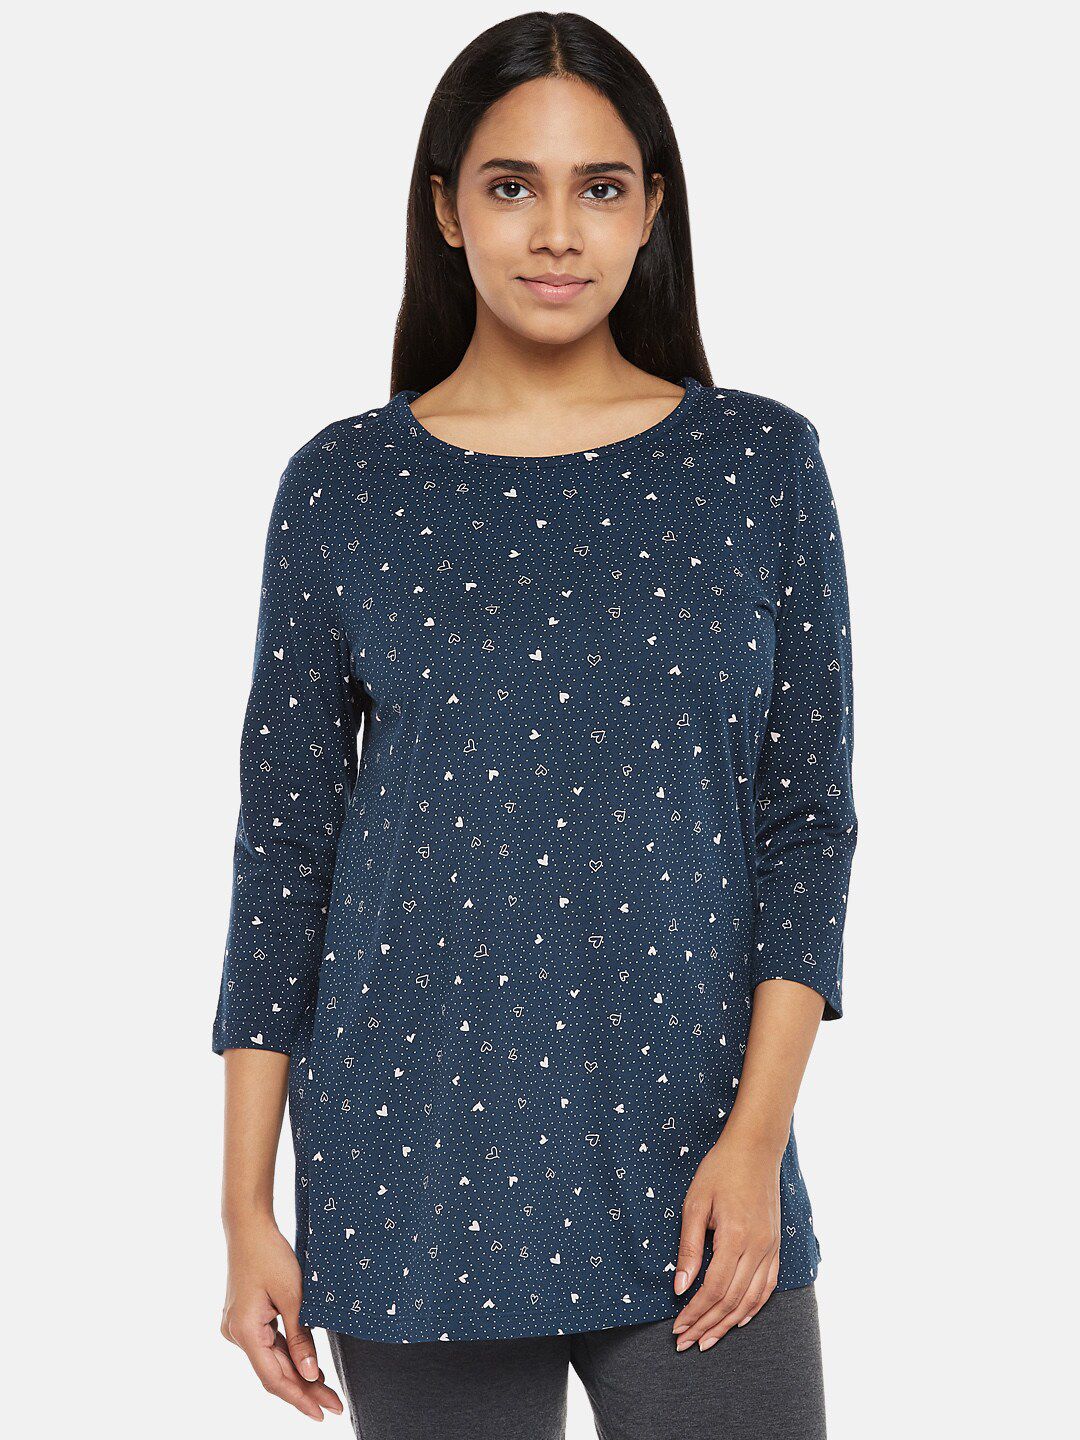 Dreamz by Pantaloons Womens Navy Blue Printed Lounge Tshirt Price in India